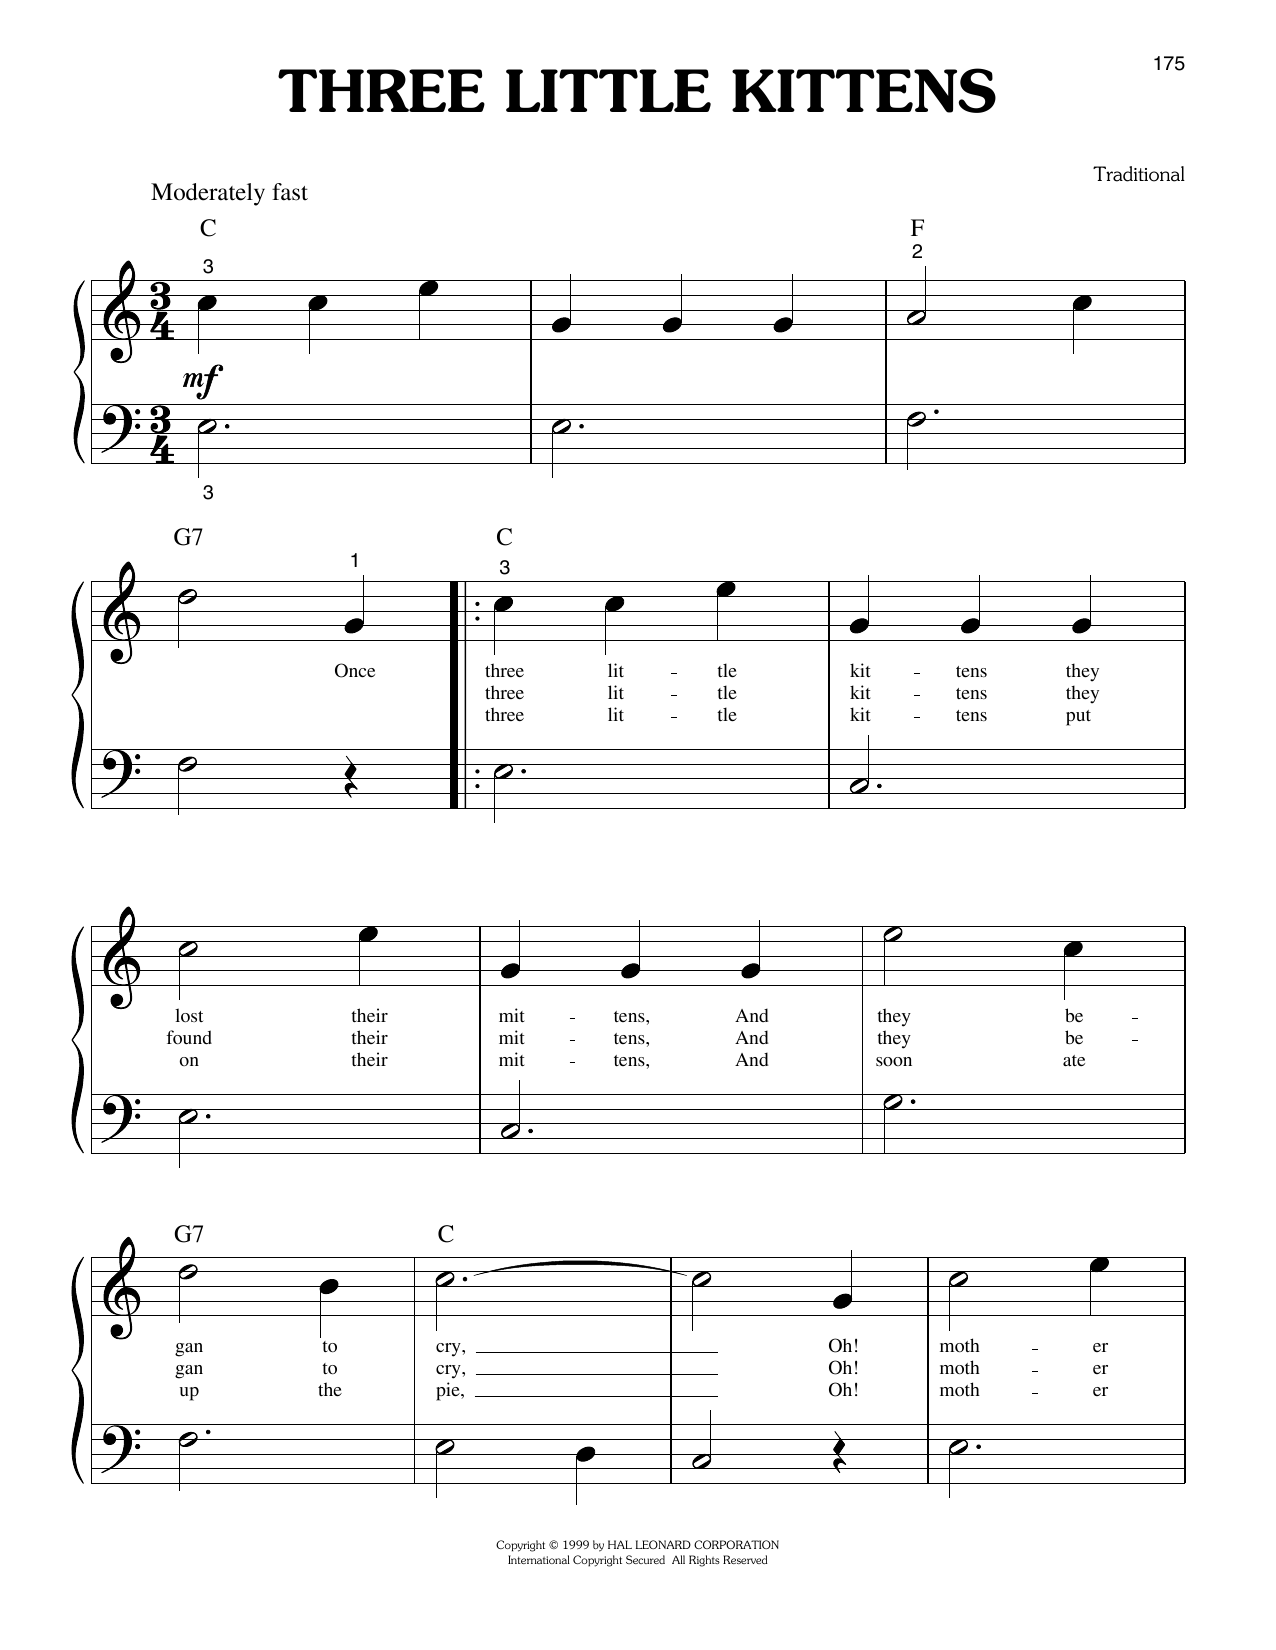 Download Traditional Three Little Kittens Sheet Music